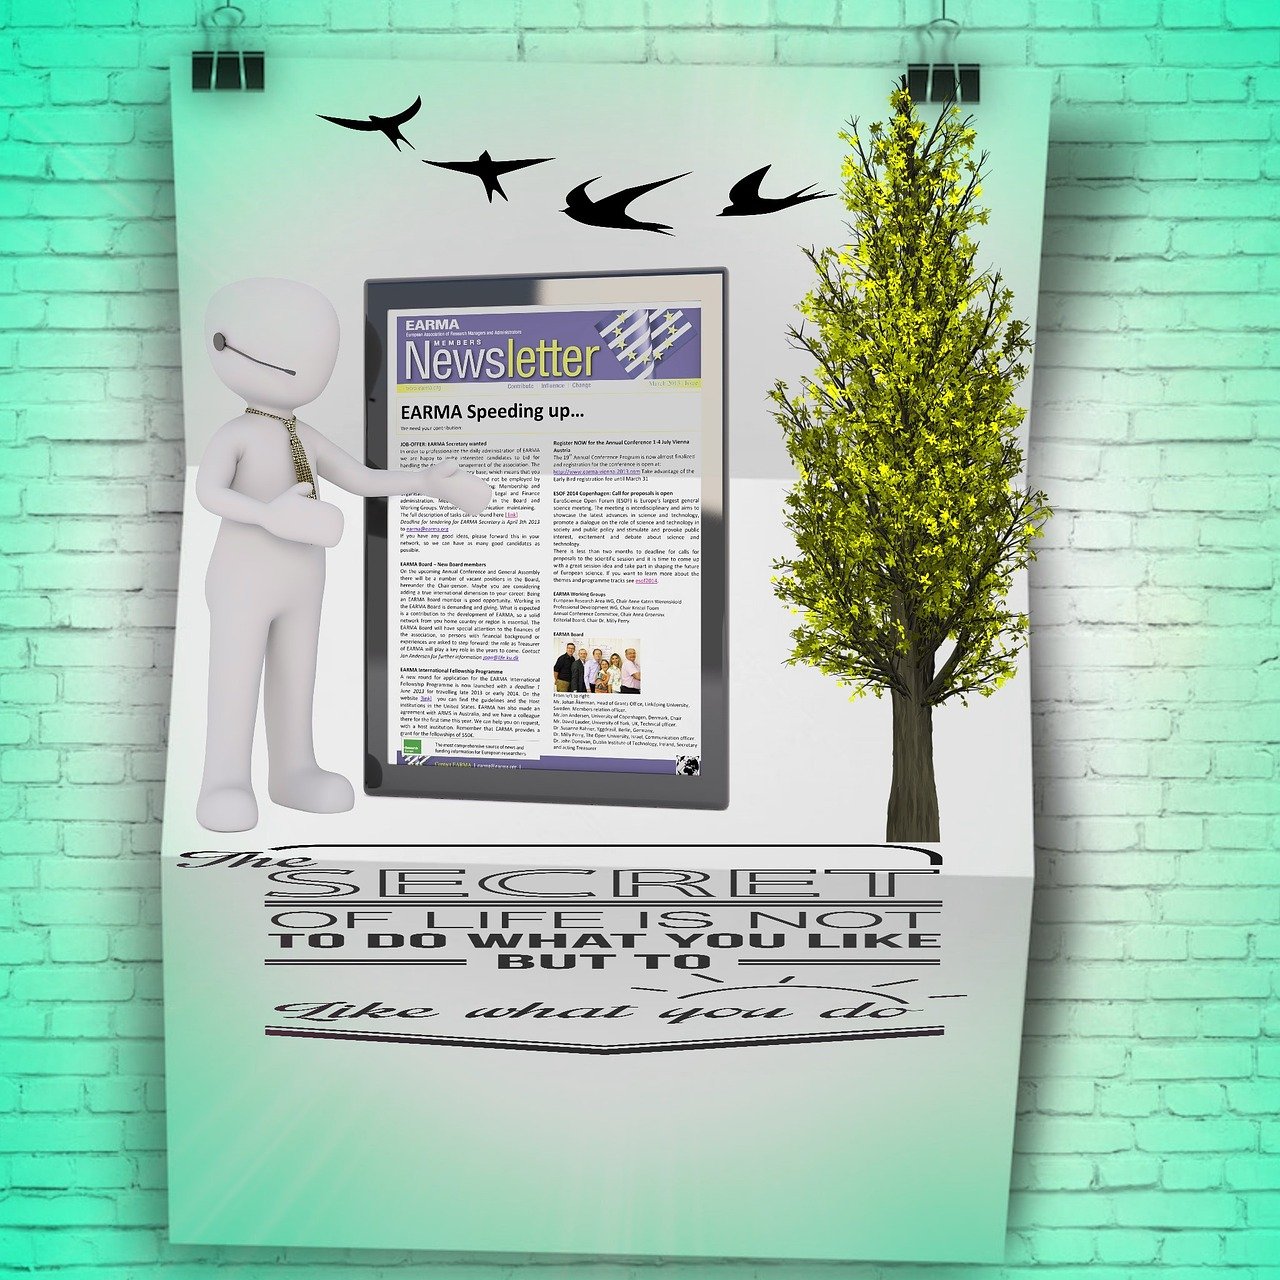 a newspaper hanging on a brick wall next to a tree, a poster, inspired by Robert Zünd, digital art, took on ipad, 3 d render n - 9, in simple background, very inspirational